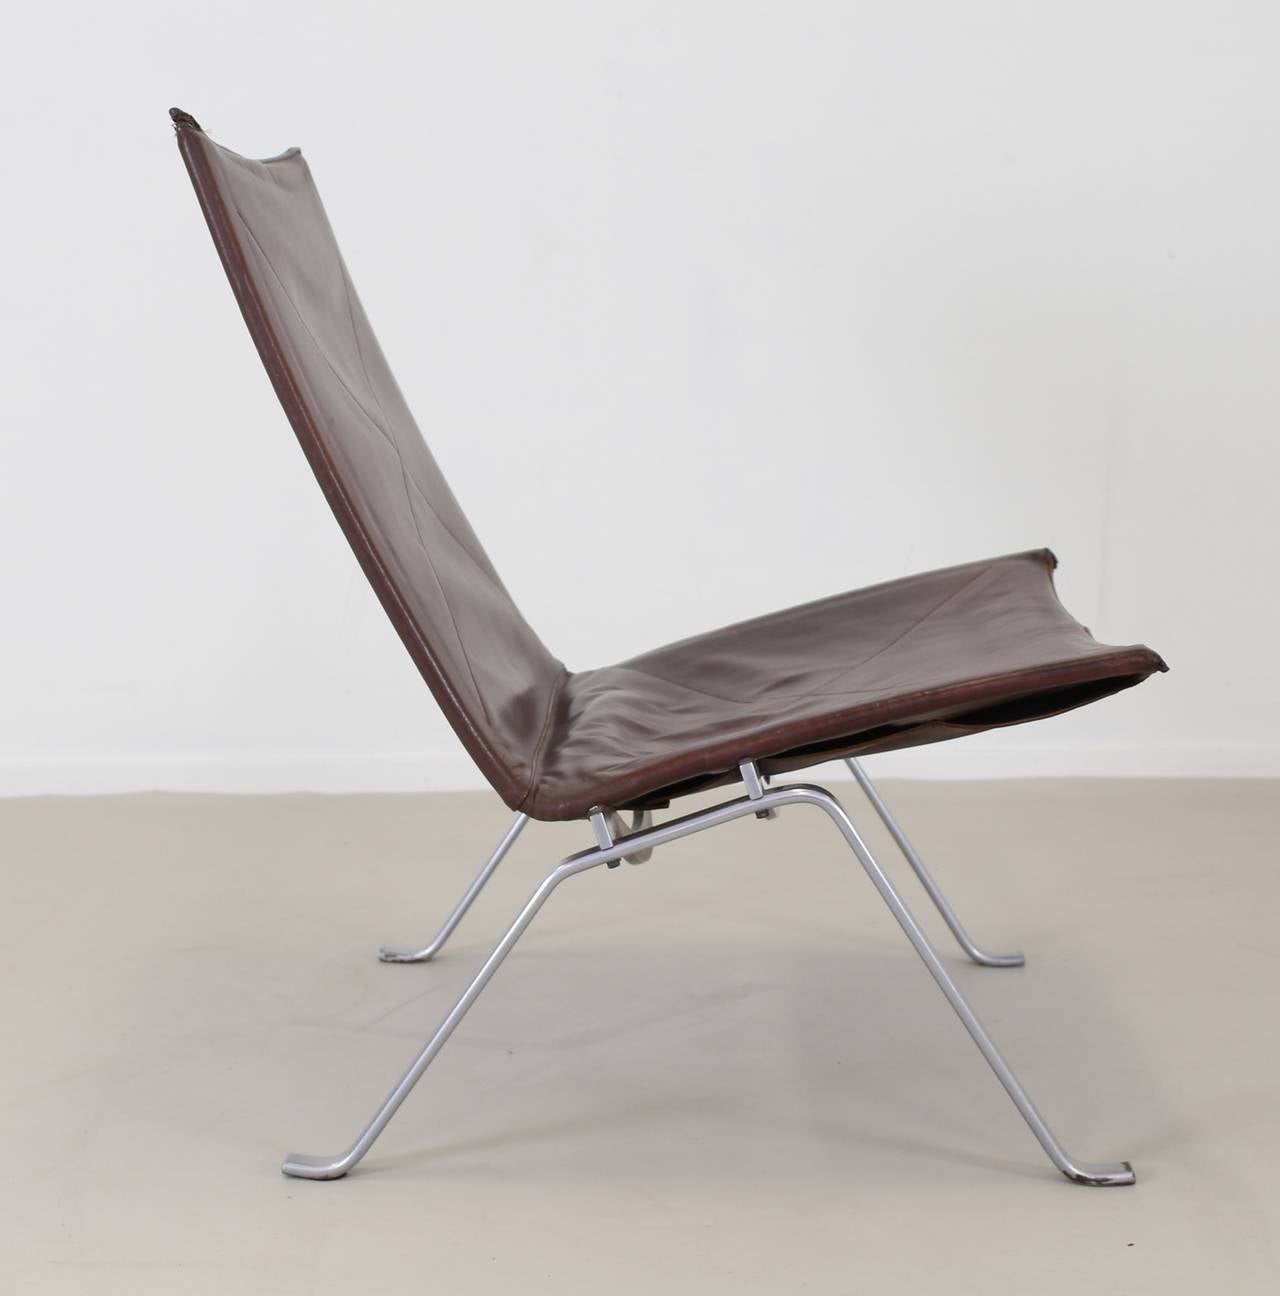 Famous easy chair by Danish top designer Poul Kjaerholm
Original E. Kold Christensen production.
Model PK 22.
Some wear on the steel feet.
Cover with nice patina but two repairs (see pics).